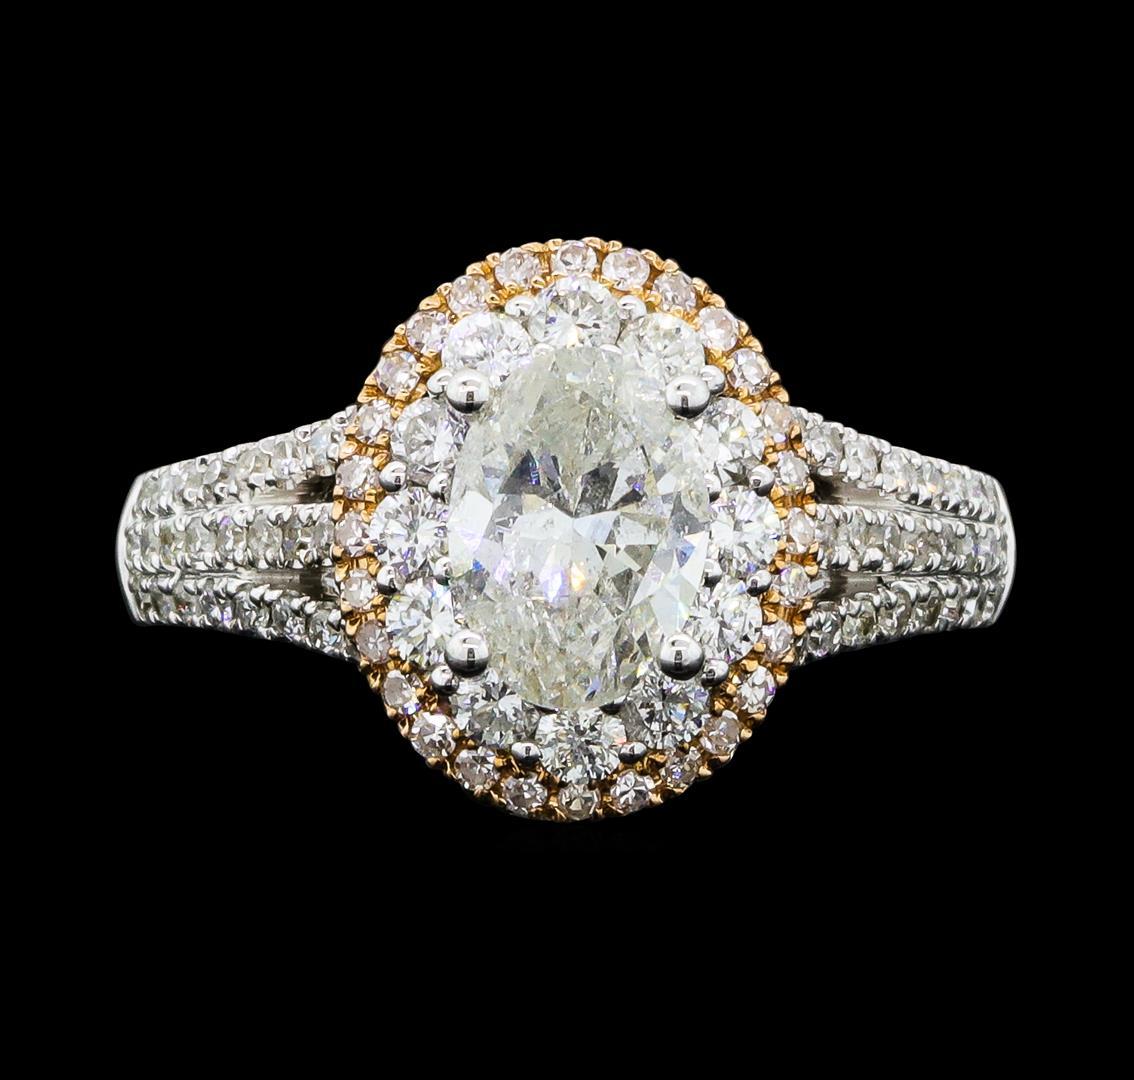 1.54 ctw Diamond Ring - 18KT White And Yellow Gold